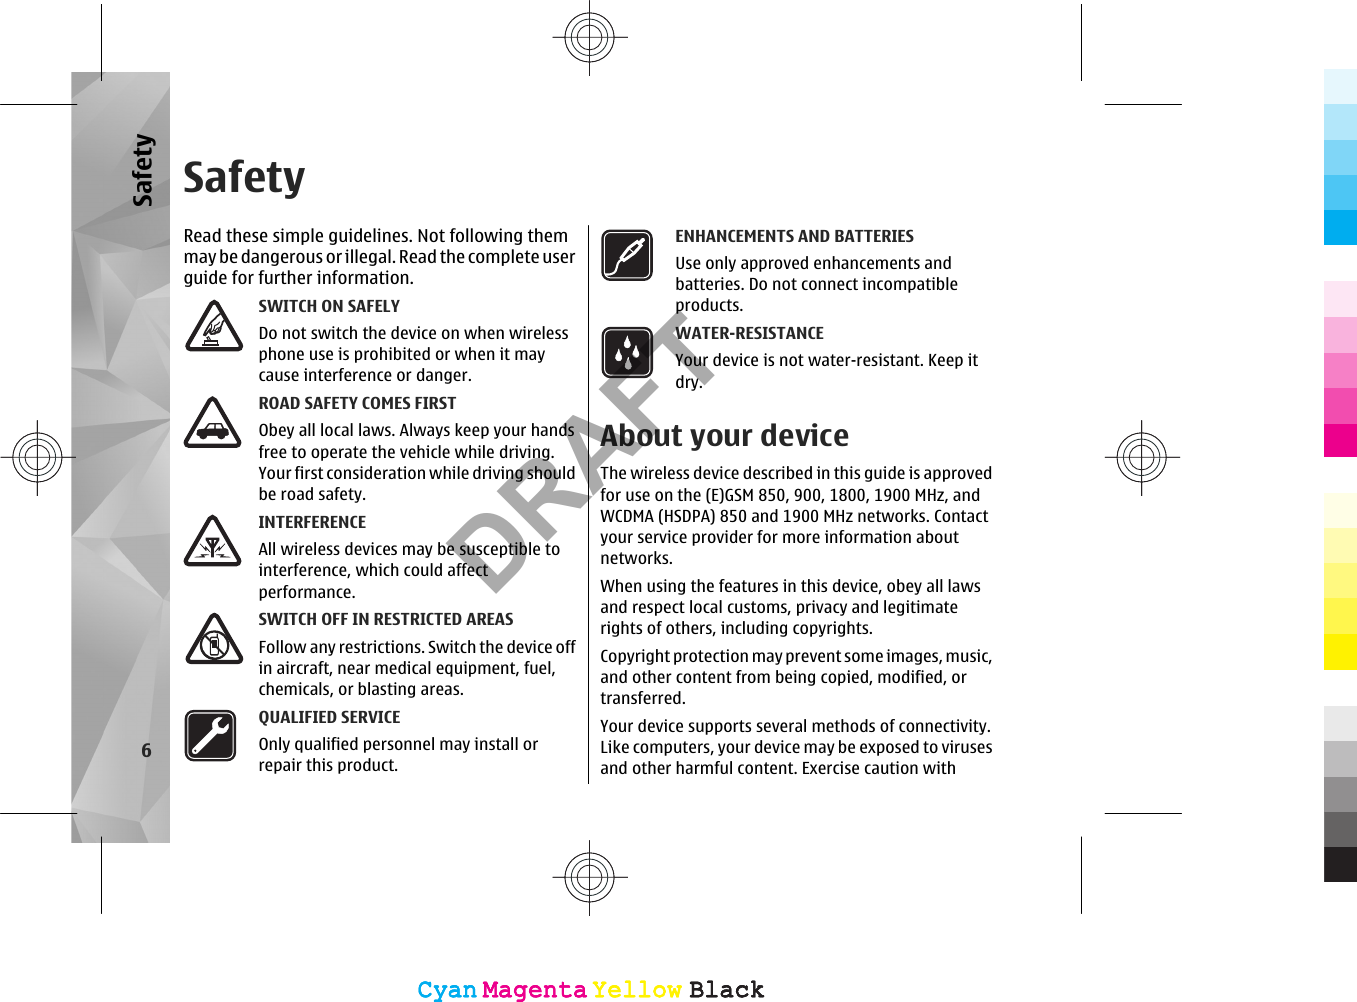 SafetyRead these simple guidelines. Not following themmay be dangerous or illegal. Read  the co mplete us erguide for further information.SWITCH ON SAFELYDo not switch the device on when wirelessphone use is prohibited or when it maycause interference or danger.ROAD SAFETY COMES FIRSTObey all local laws. Always keep your handsfree to operate the vehicle while driving.Your first consideration while driving shouldbe road safety.INTERFERENCEAll wireless devices may be susceptible tointerference, which could affectperformance.SWITCH OFF IN RESTRICTED AREASFollow any restrictions. Switch the device offin aircraft, near medical equipment, fuel,chemicals, or blasting areas.QUALIFIED SERVICEOnly qualified personnel may install orrepair this product.ENHANCEMENTS AND BATTERIESUse only approved enhancements andbatteries. Do not connect incompatibleproducts.WATER-RESISTANCEYour device is not water-resistant. Keep itdry.About your deviceThe wireless device described in this guide is approvedfor use on the (E)GSM 850, 900, 1800, 1900 MHz, andWCDMA (HSDPA) 850 and 1900 MHz networks. Contactyour service provider for more information aboutnetworks.When using the features in this device, obey all lawsand respect local customs, privacy and legitimaterights of others, including copyrights.Copyright protection may prevent some images, music,and other content from being copied, modified, ortransferred.Your device supports several methods of connectivity.Like computers, your device may be exposed to virusesand other harmful content. Exercise caution with6SafetyCyanCyanMagentaMagentaYellowYellowBlackBlackCyanCyanMagentaMagentaYellowYellowBlackBlackDRAFT